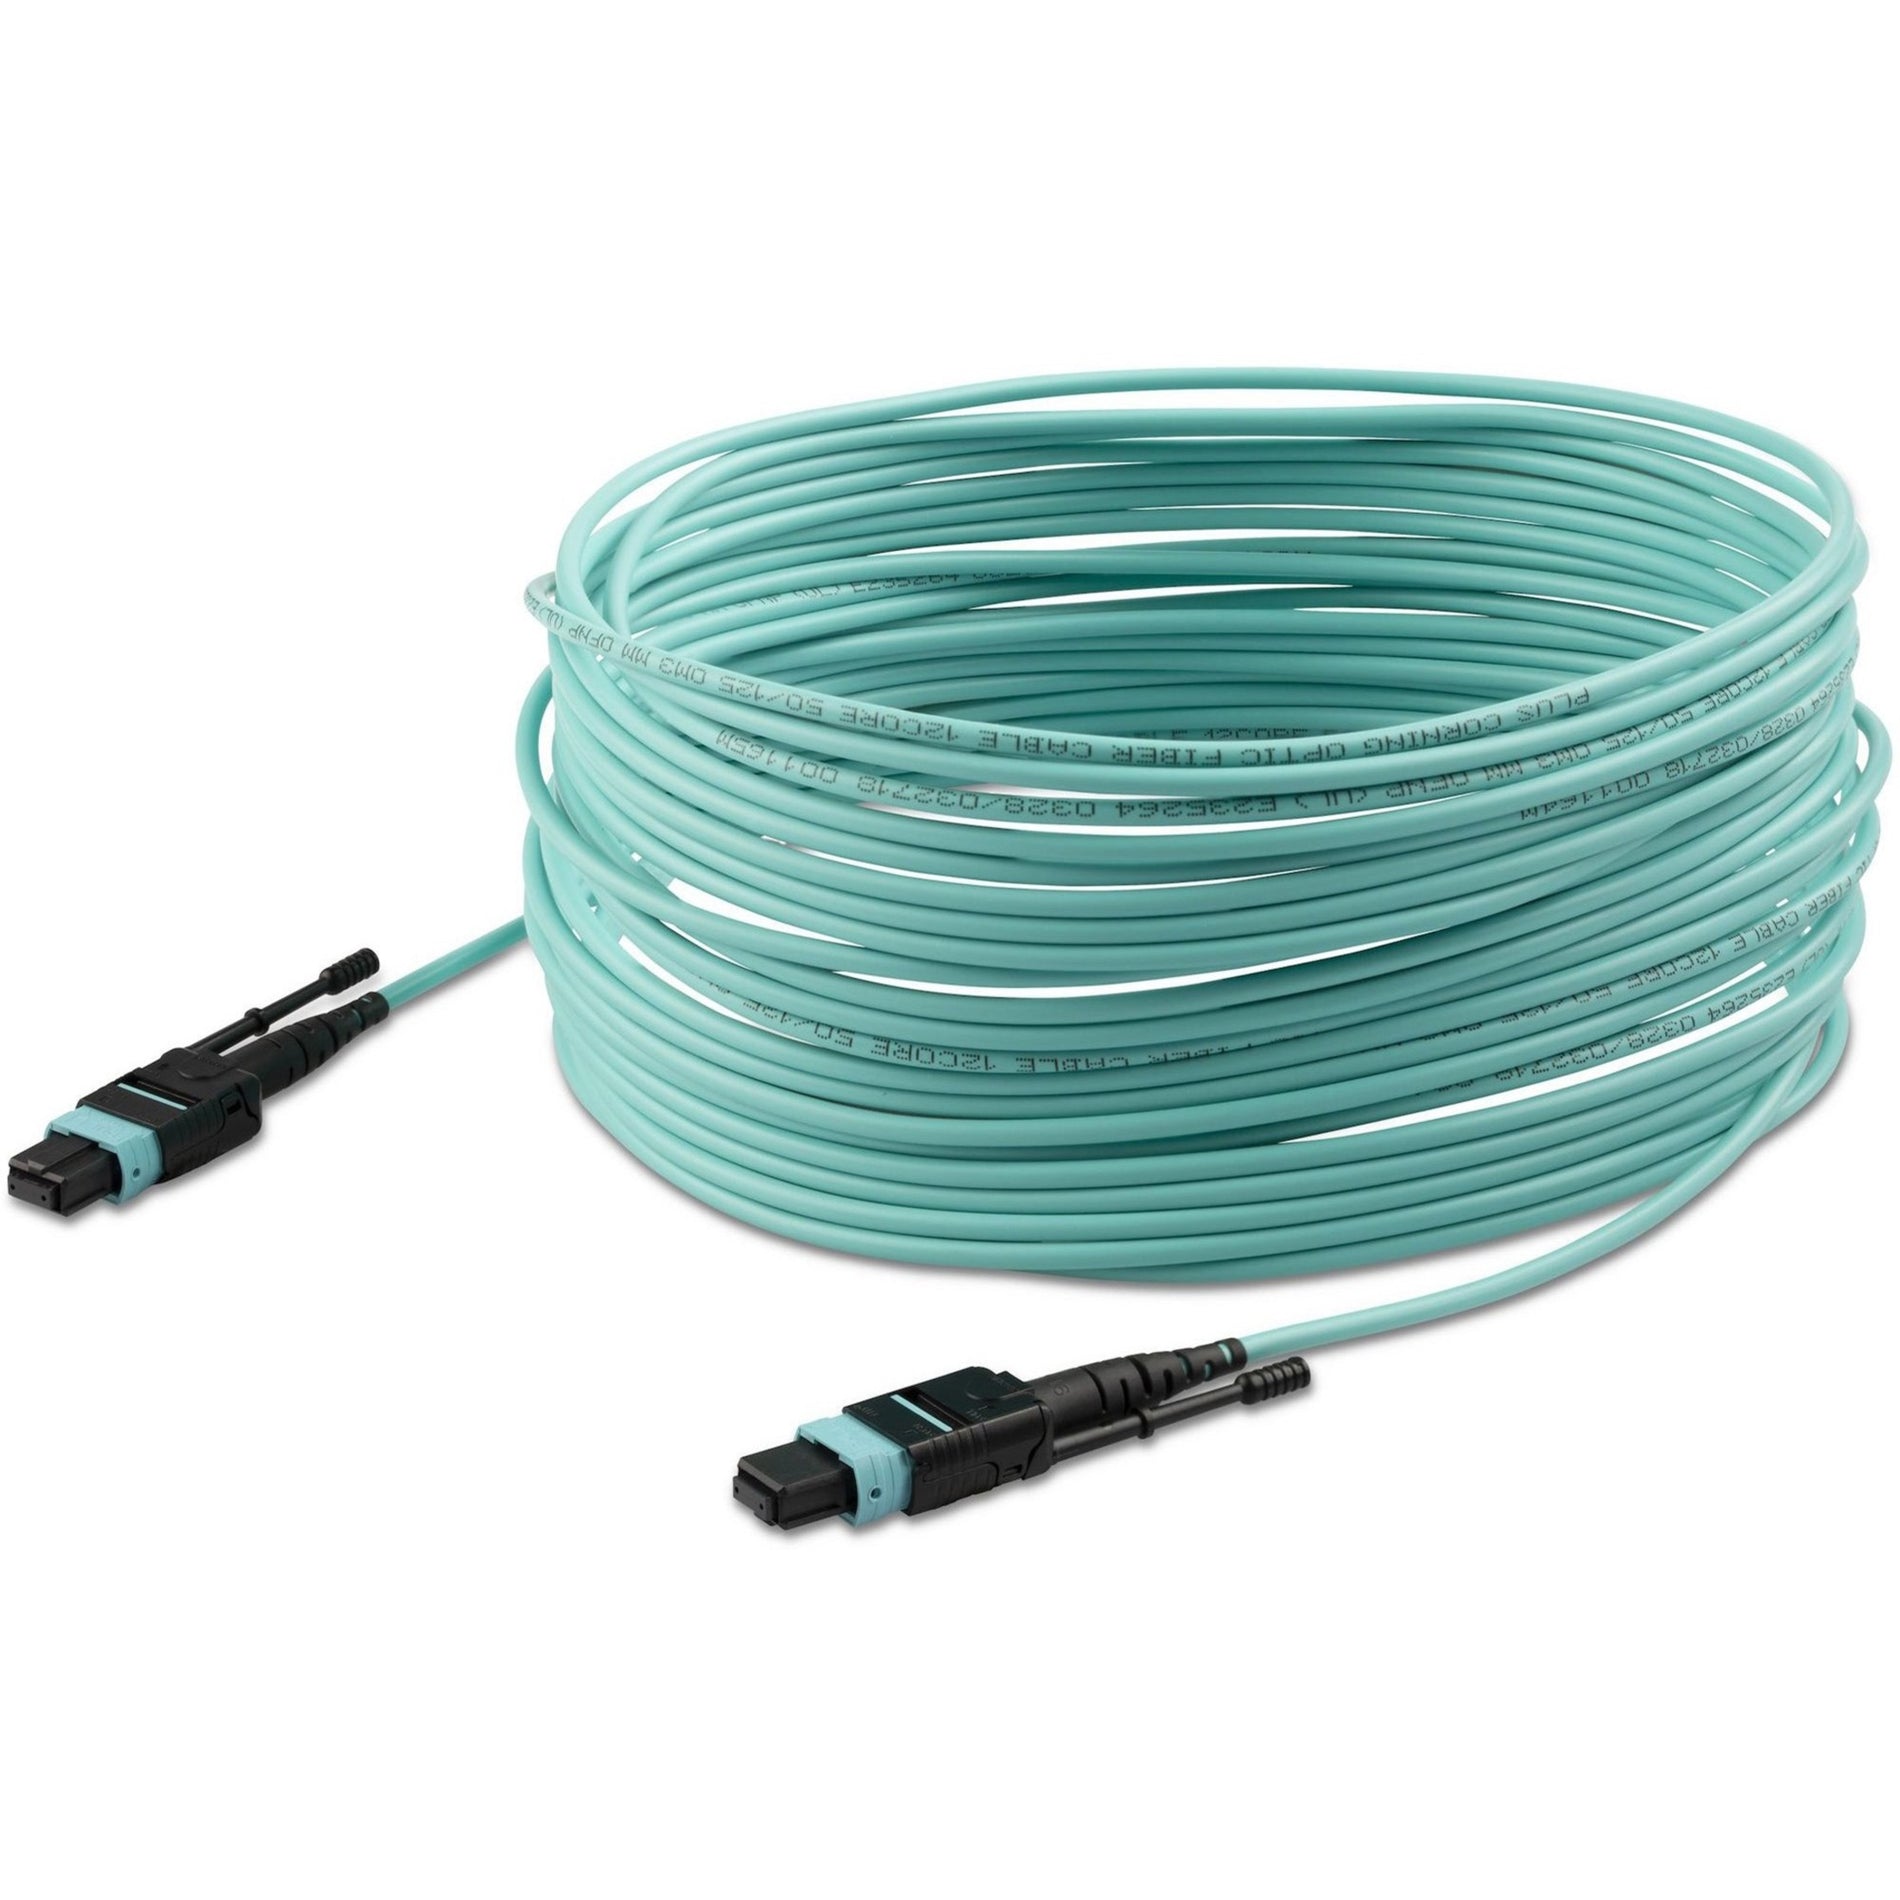 StarTech.com MPO12PL10M Fiber Optic Network Cable, 10m 30 ft Plenum-Rated MTP to MTP Cable, OM3, 40G MPO Cable